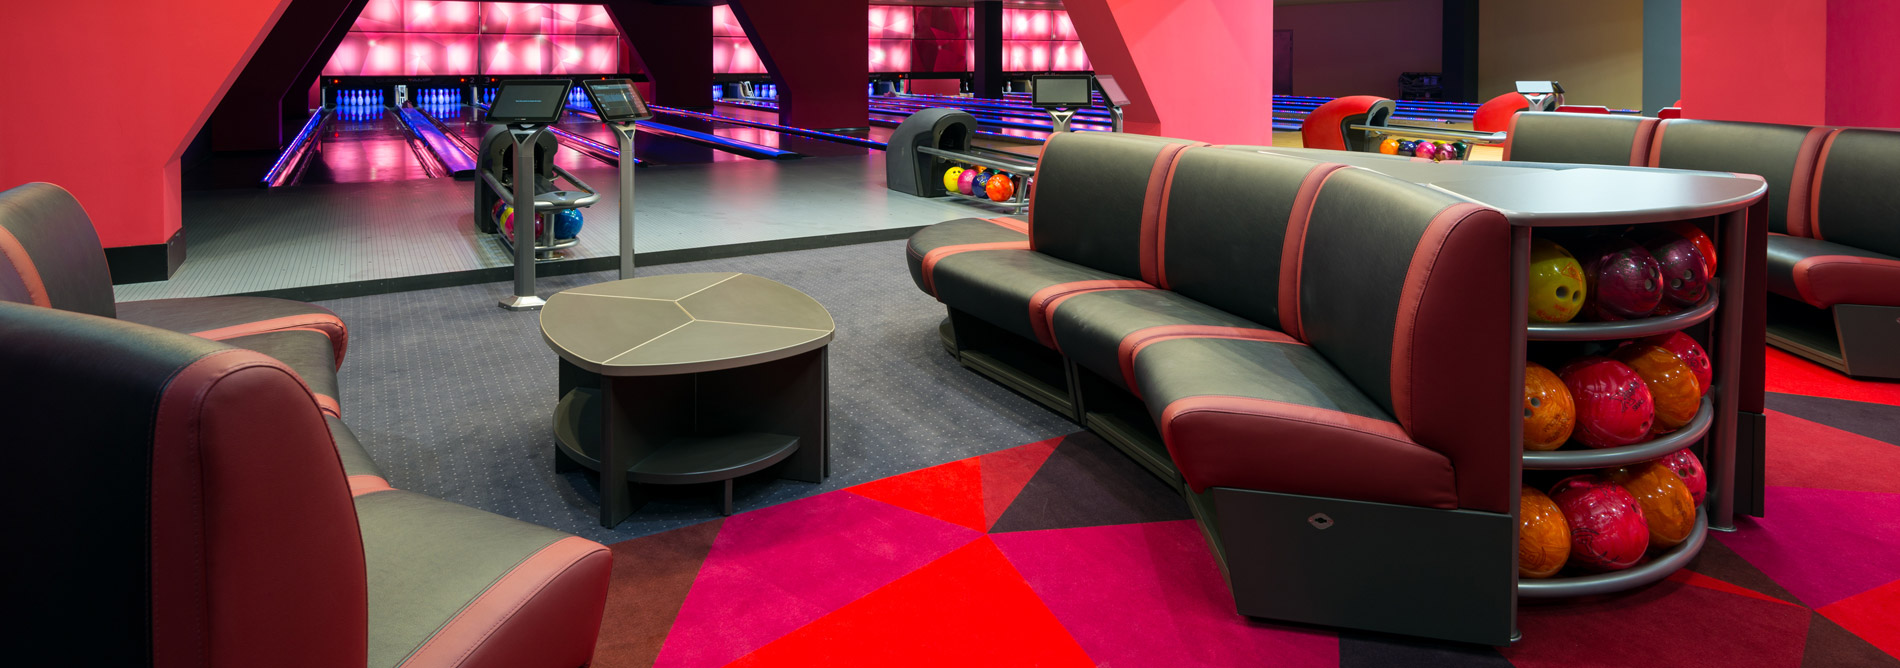 Bowling-QubicaAMF-furniture-design-elements-harmony-banner.jpg